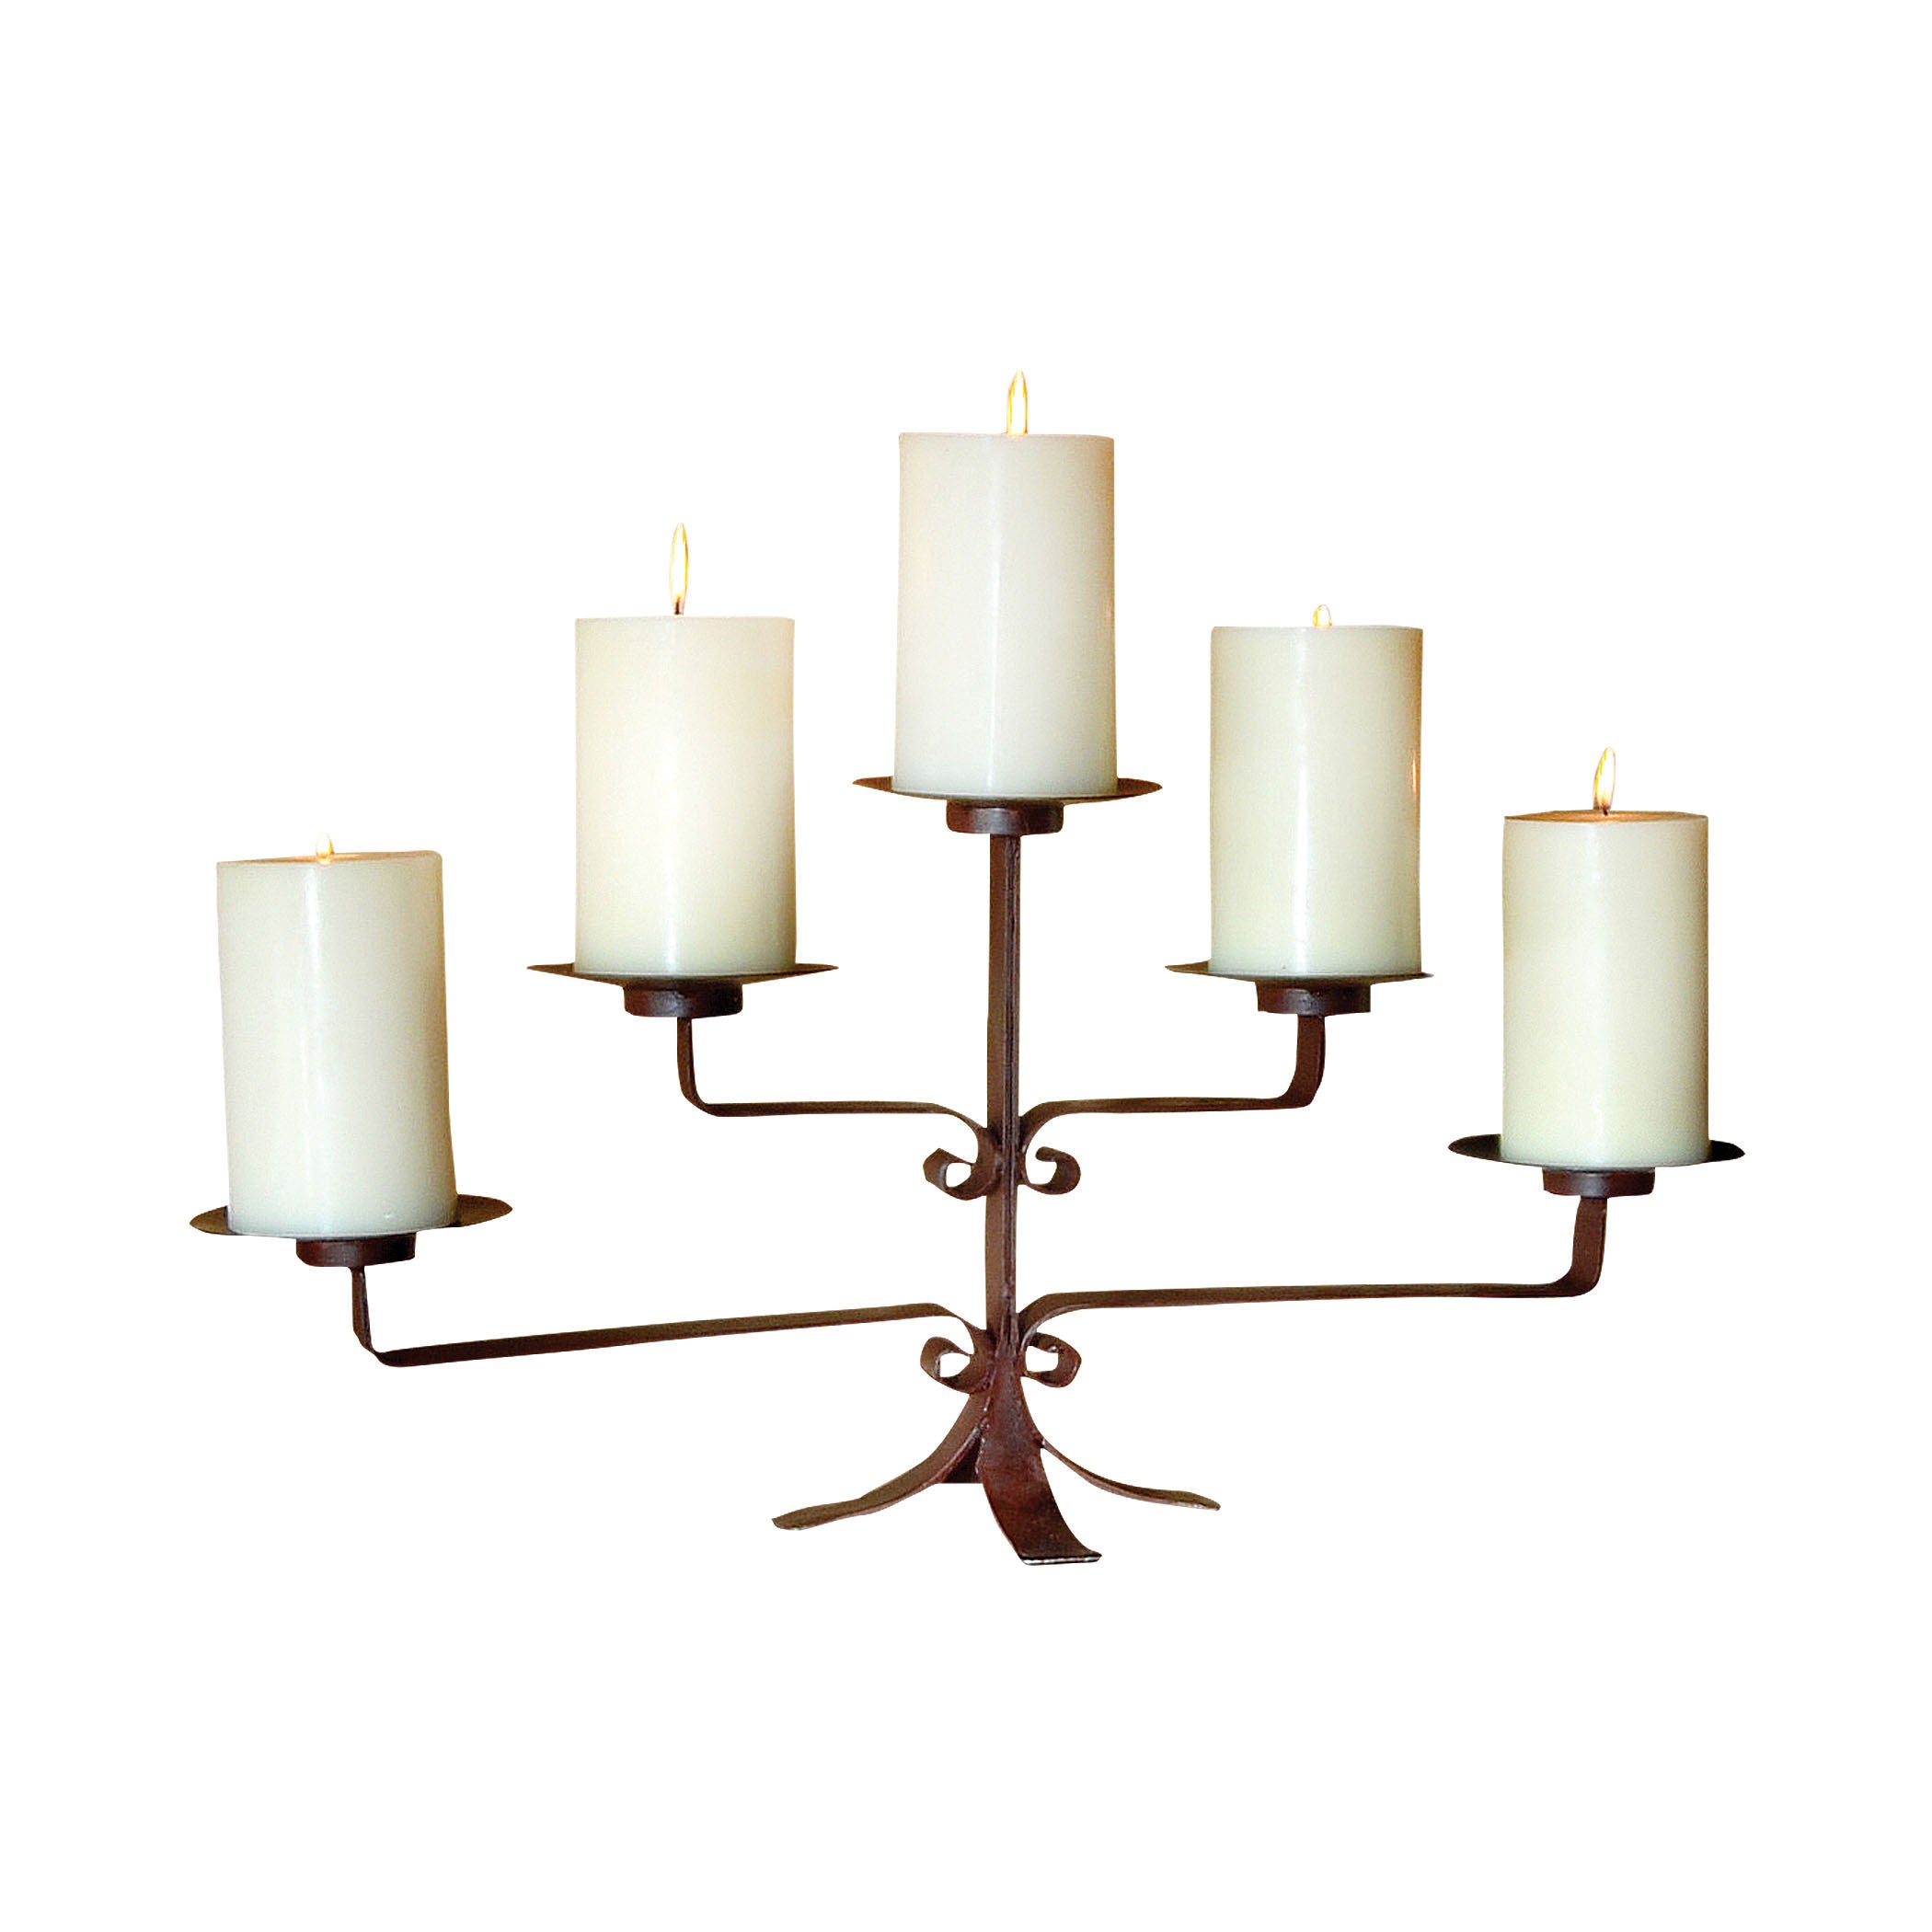 Pomeroy Pom-617621 Sierra Collection Montana Rustic Finish Candle/candle Holder